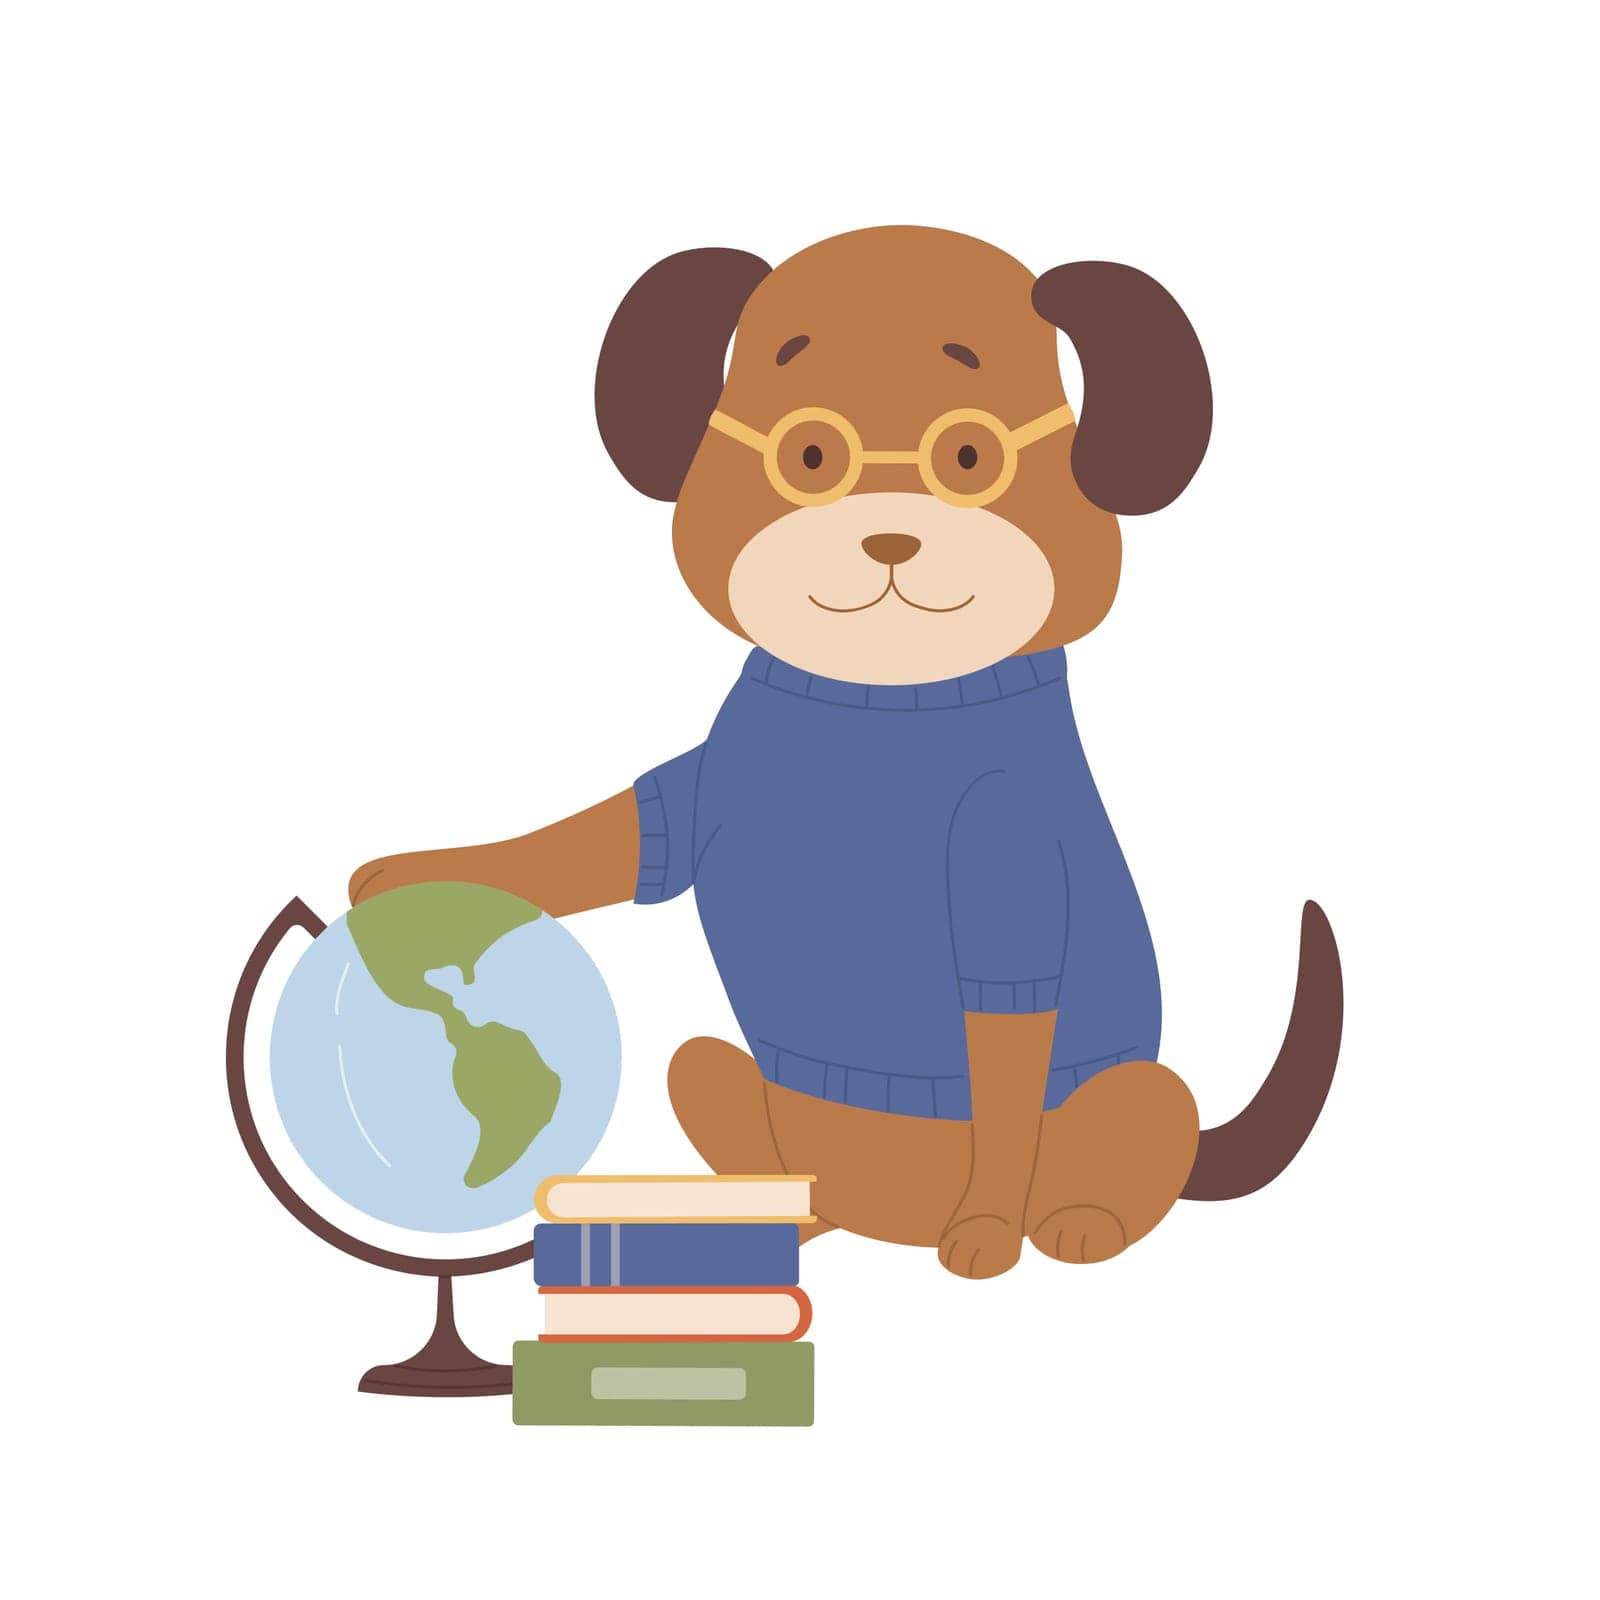 Cute dog with glasses with geography globe. Wise student puppy near stack of books cartoon vector illustration